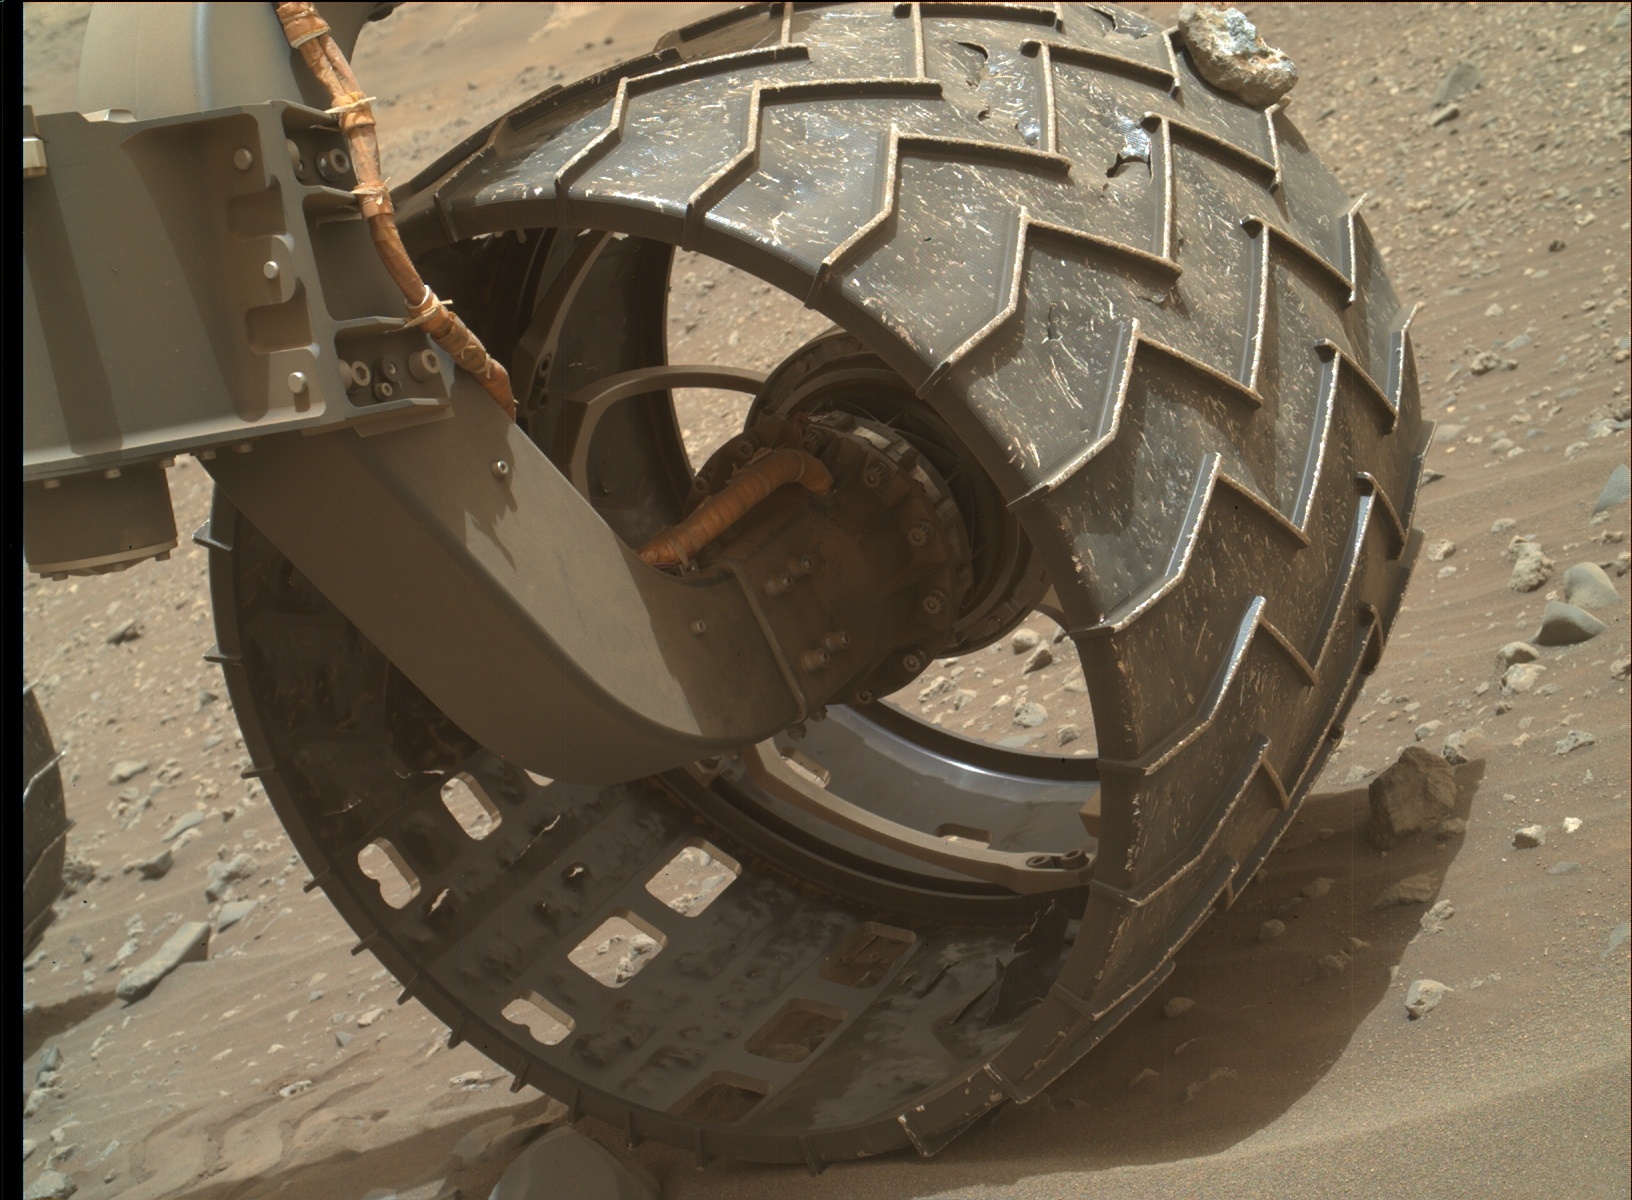 Nasa's Mars rover Curiosity acquired this image using its Mars Hand Lens Imager (MAHLI) on Sol 971